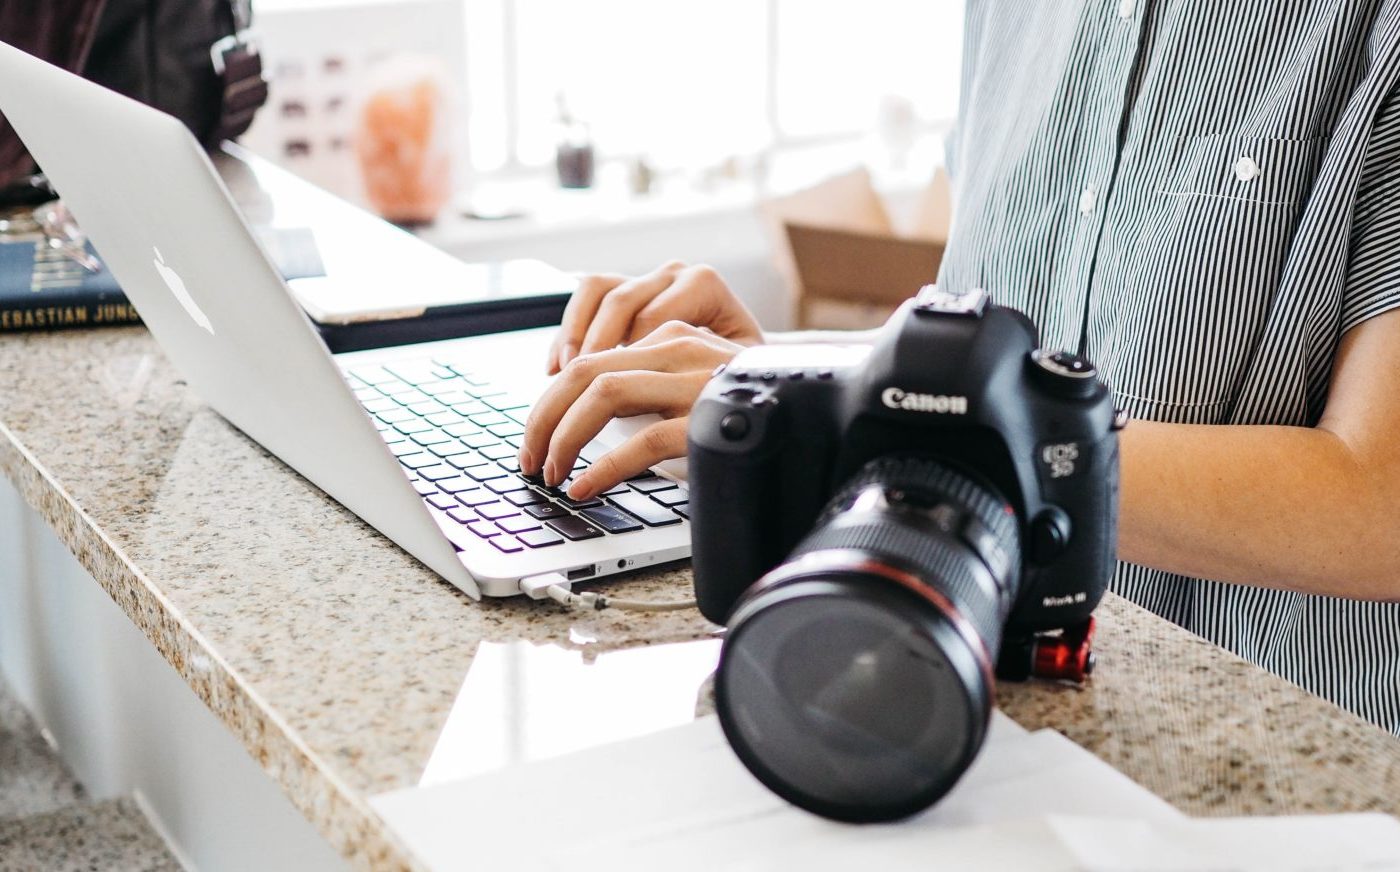 Get your e-commerce photography right